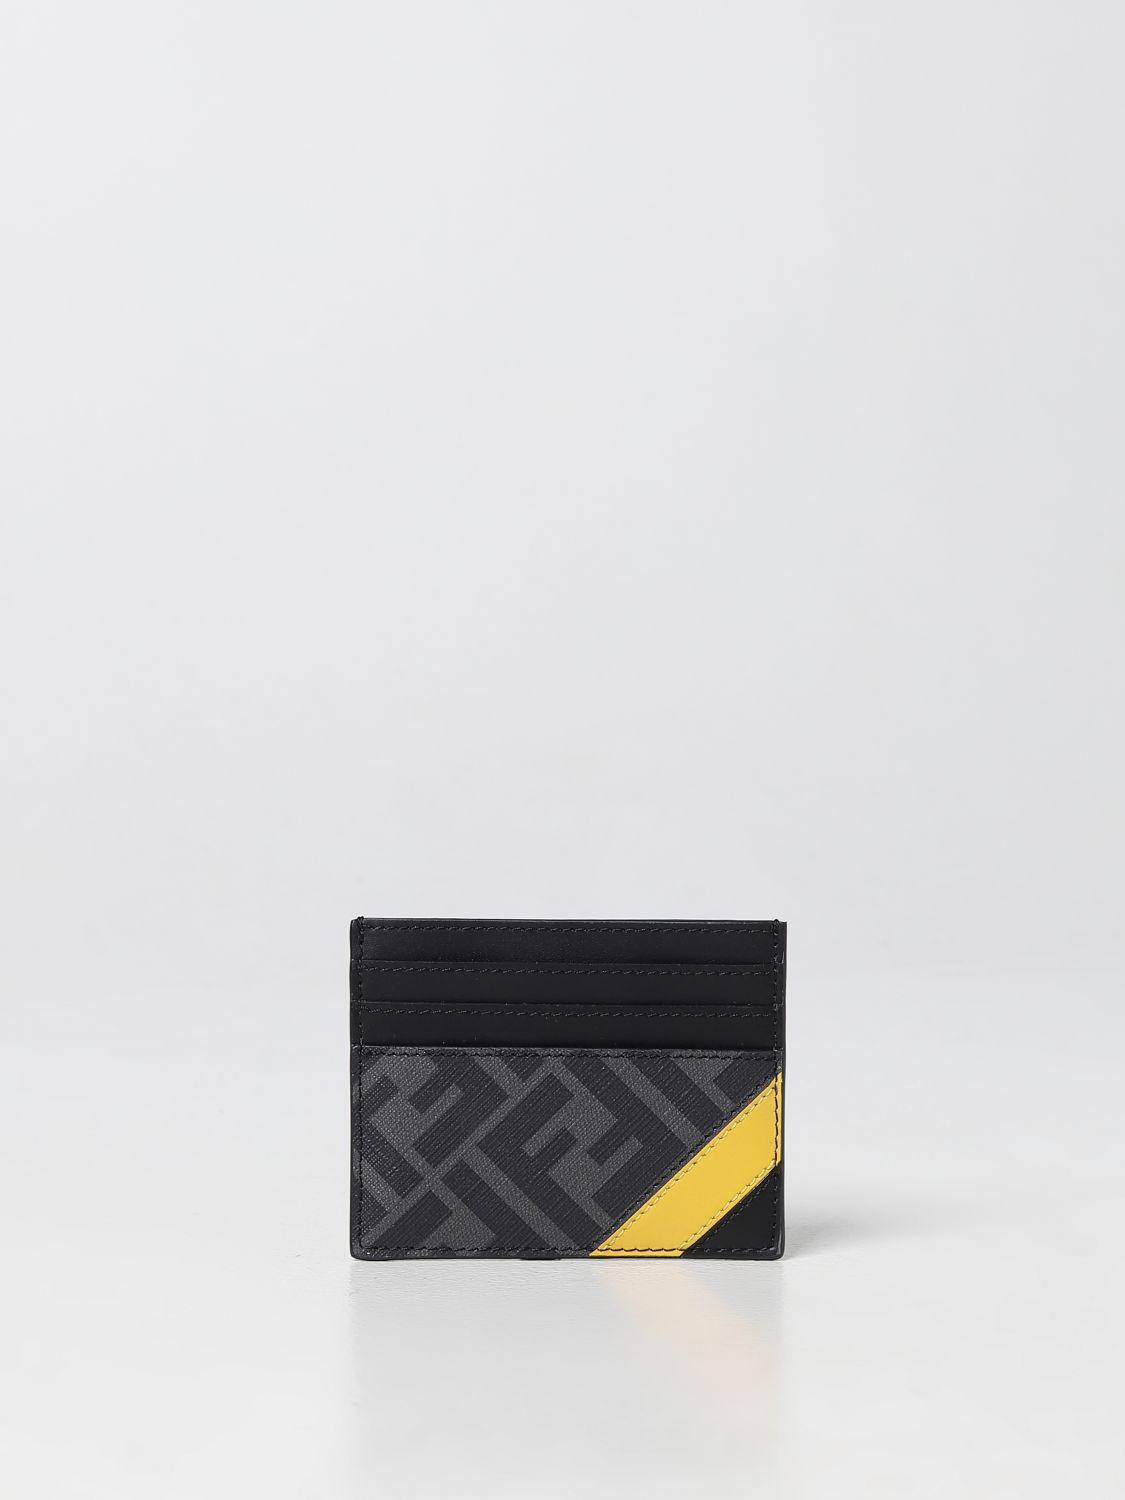 rand Grammatica Omtrek FENDI: credit card holder in leather and coated fabric - Grey | Fendi wallet  7M0164A9XS online on GIGLIO.COM